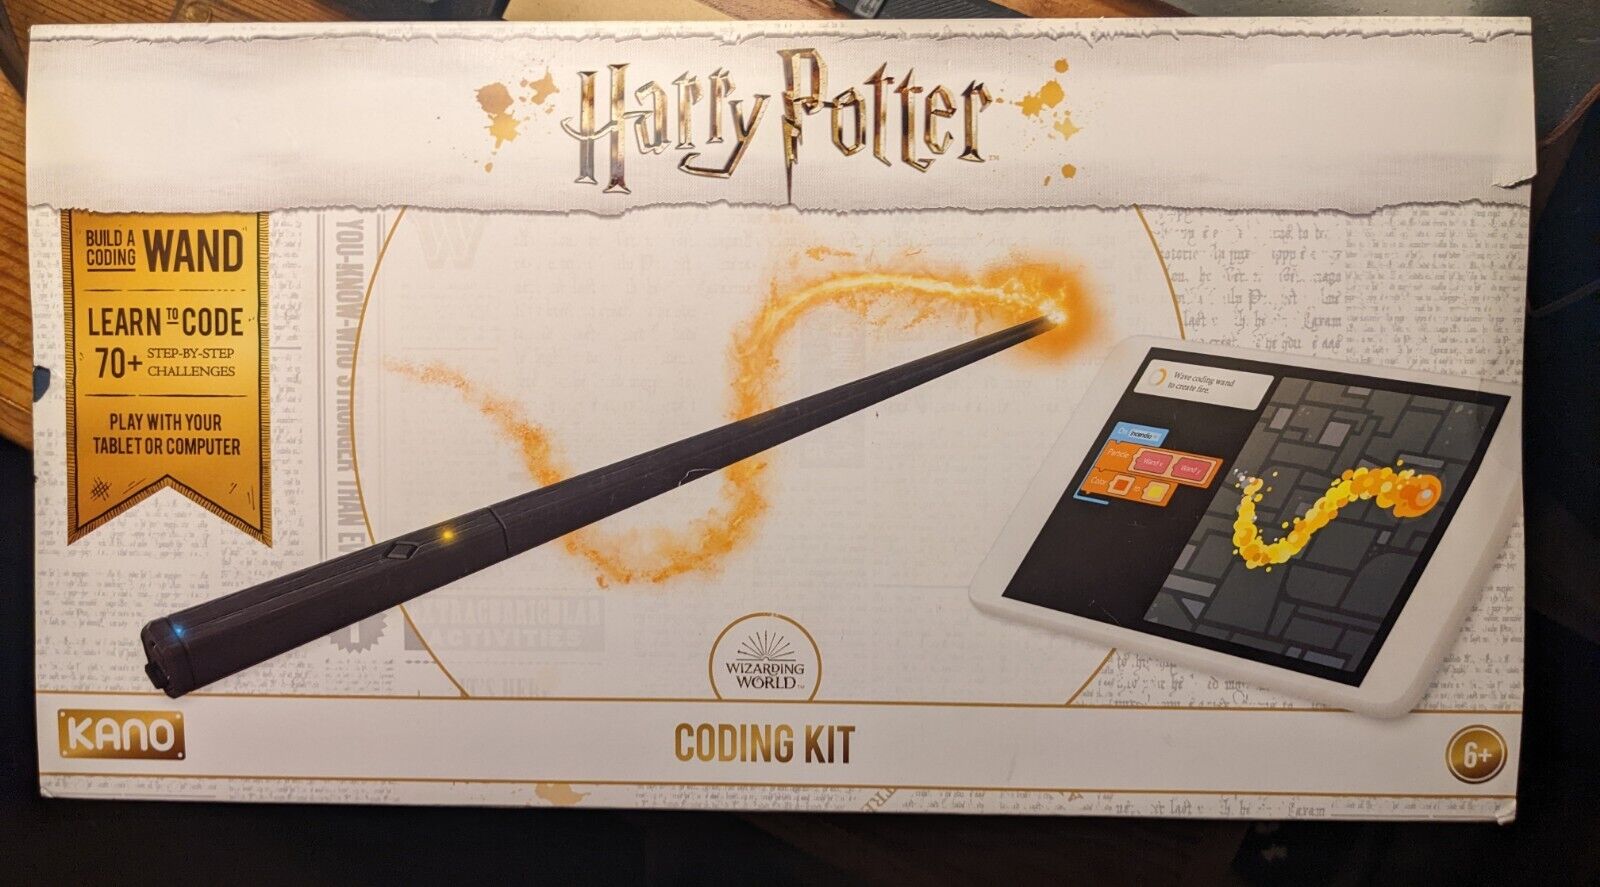 Kano Harry Potter Coding Kit - Build a Wand Learn To Code New In Box